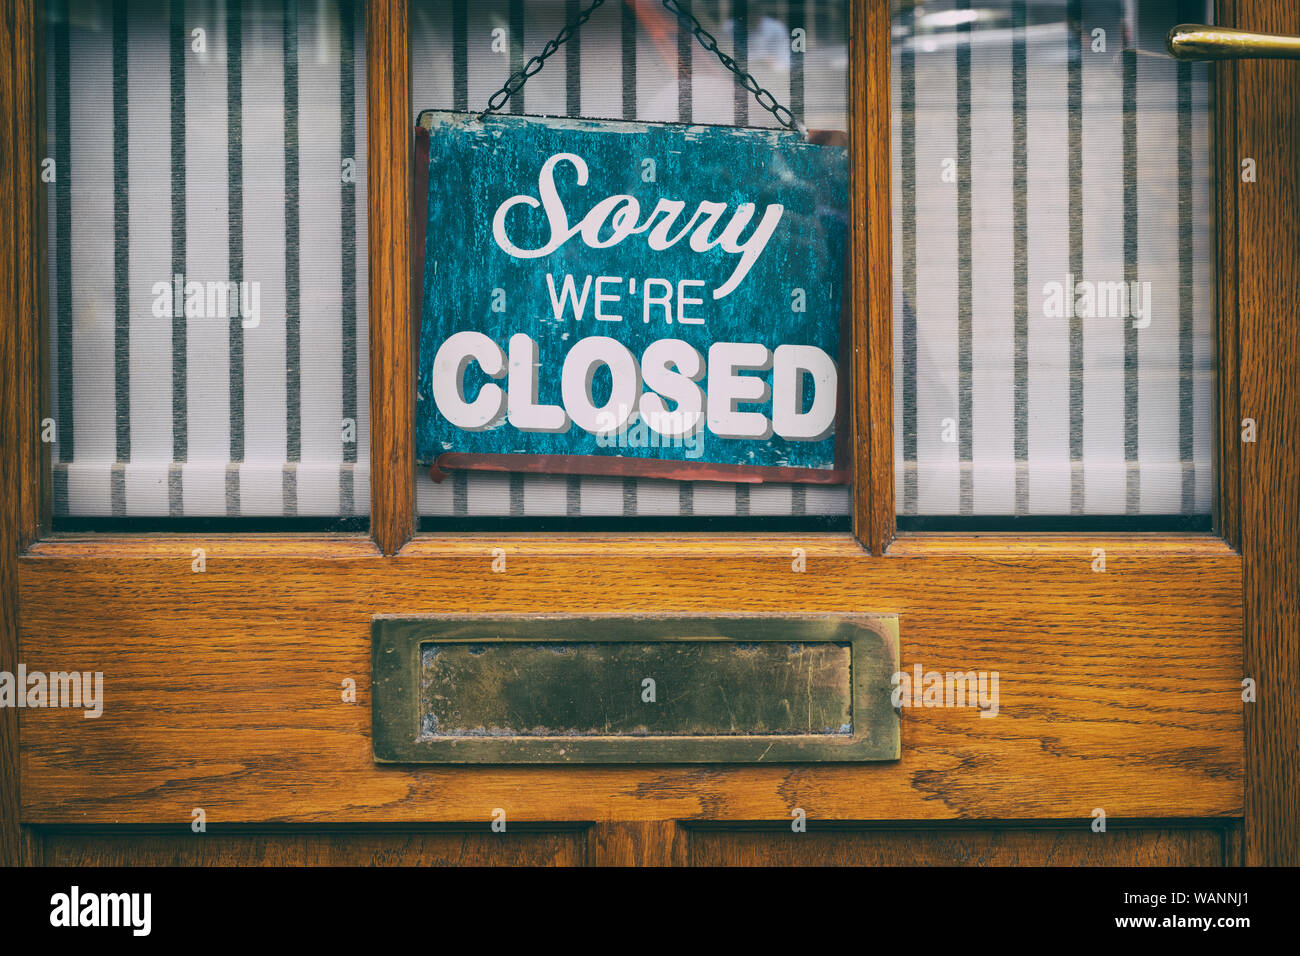 Sorry were closed sign on a shop wooden door. Stow on the wold, Gloucestershire, Cotswolds, England. Vintage filter applied Stock Photo